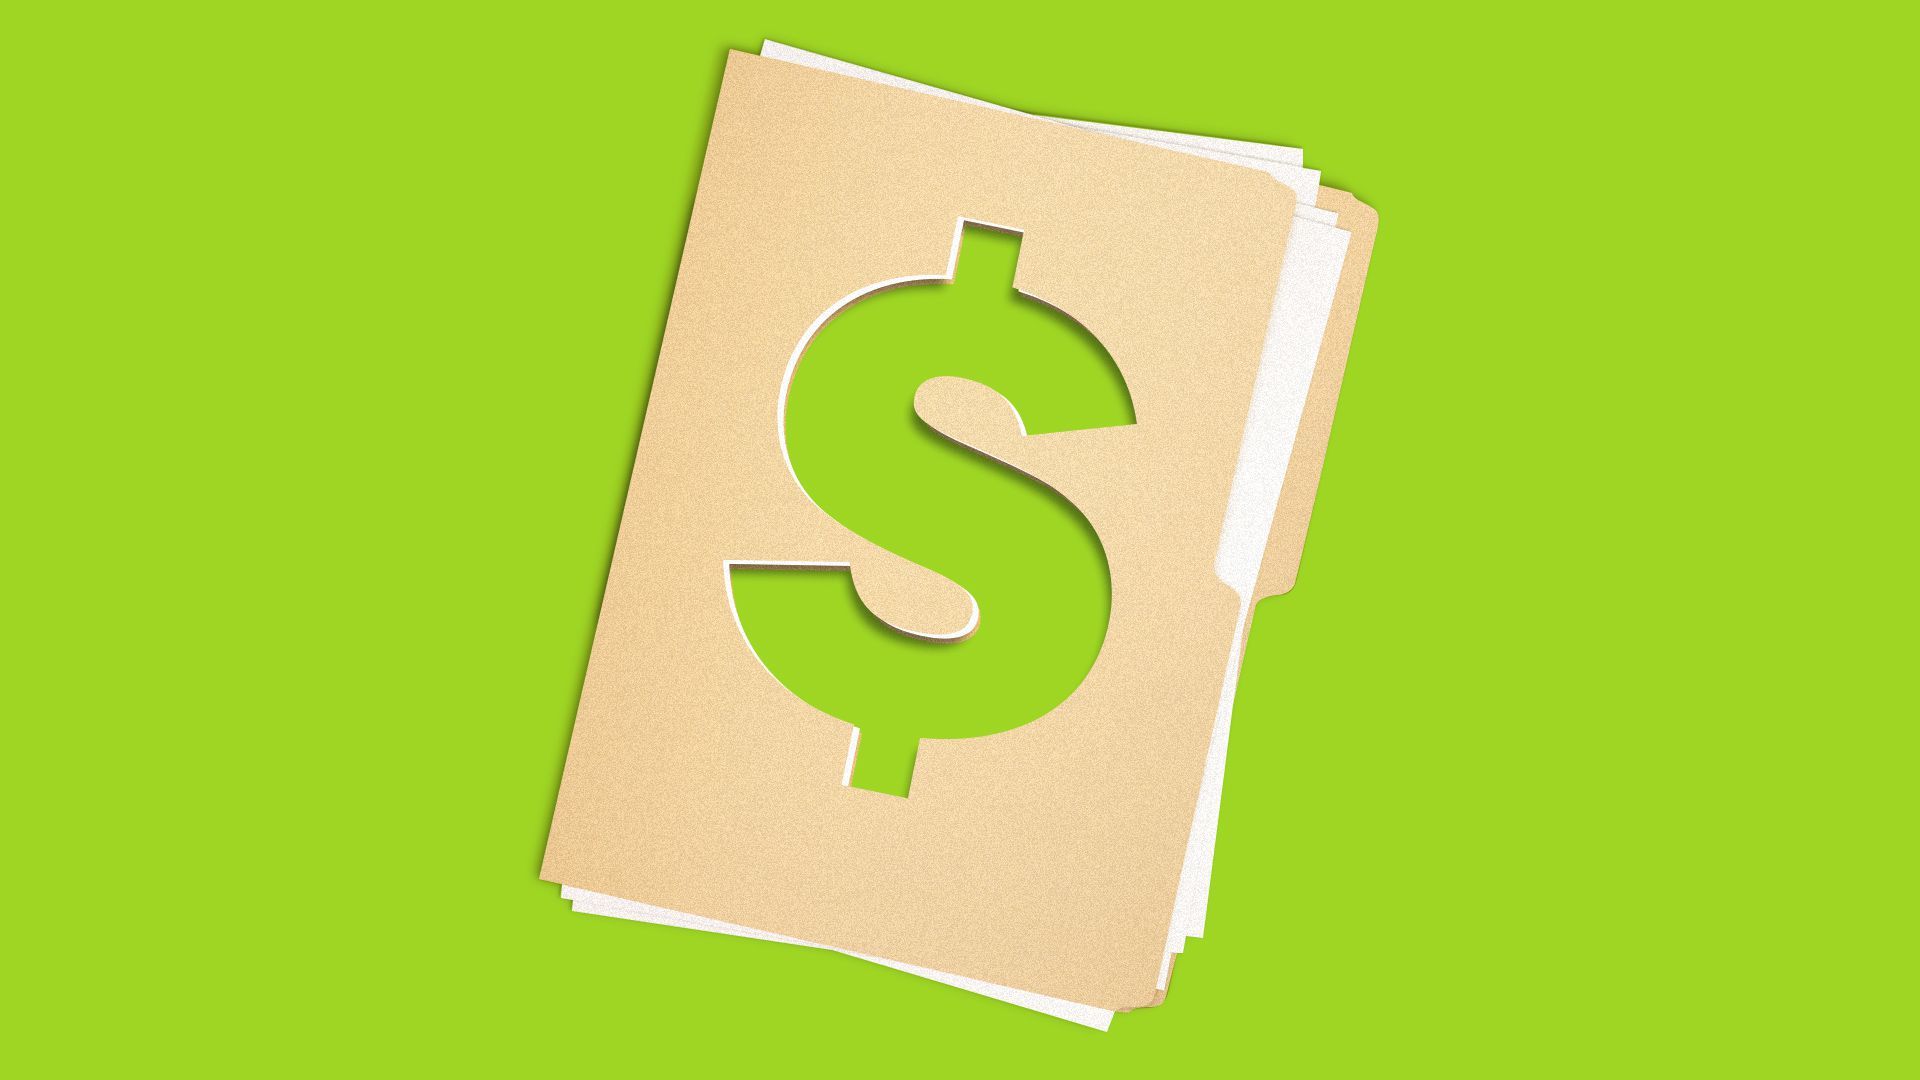 Illustration of a folder with a dollar bill sign cut out of it.  